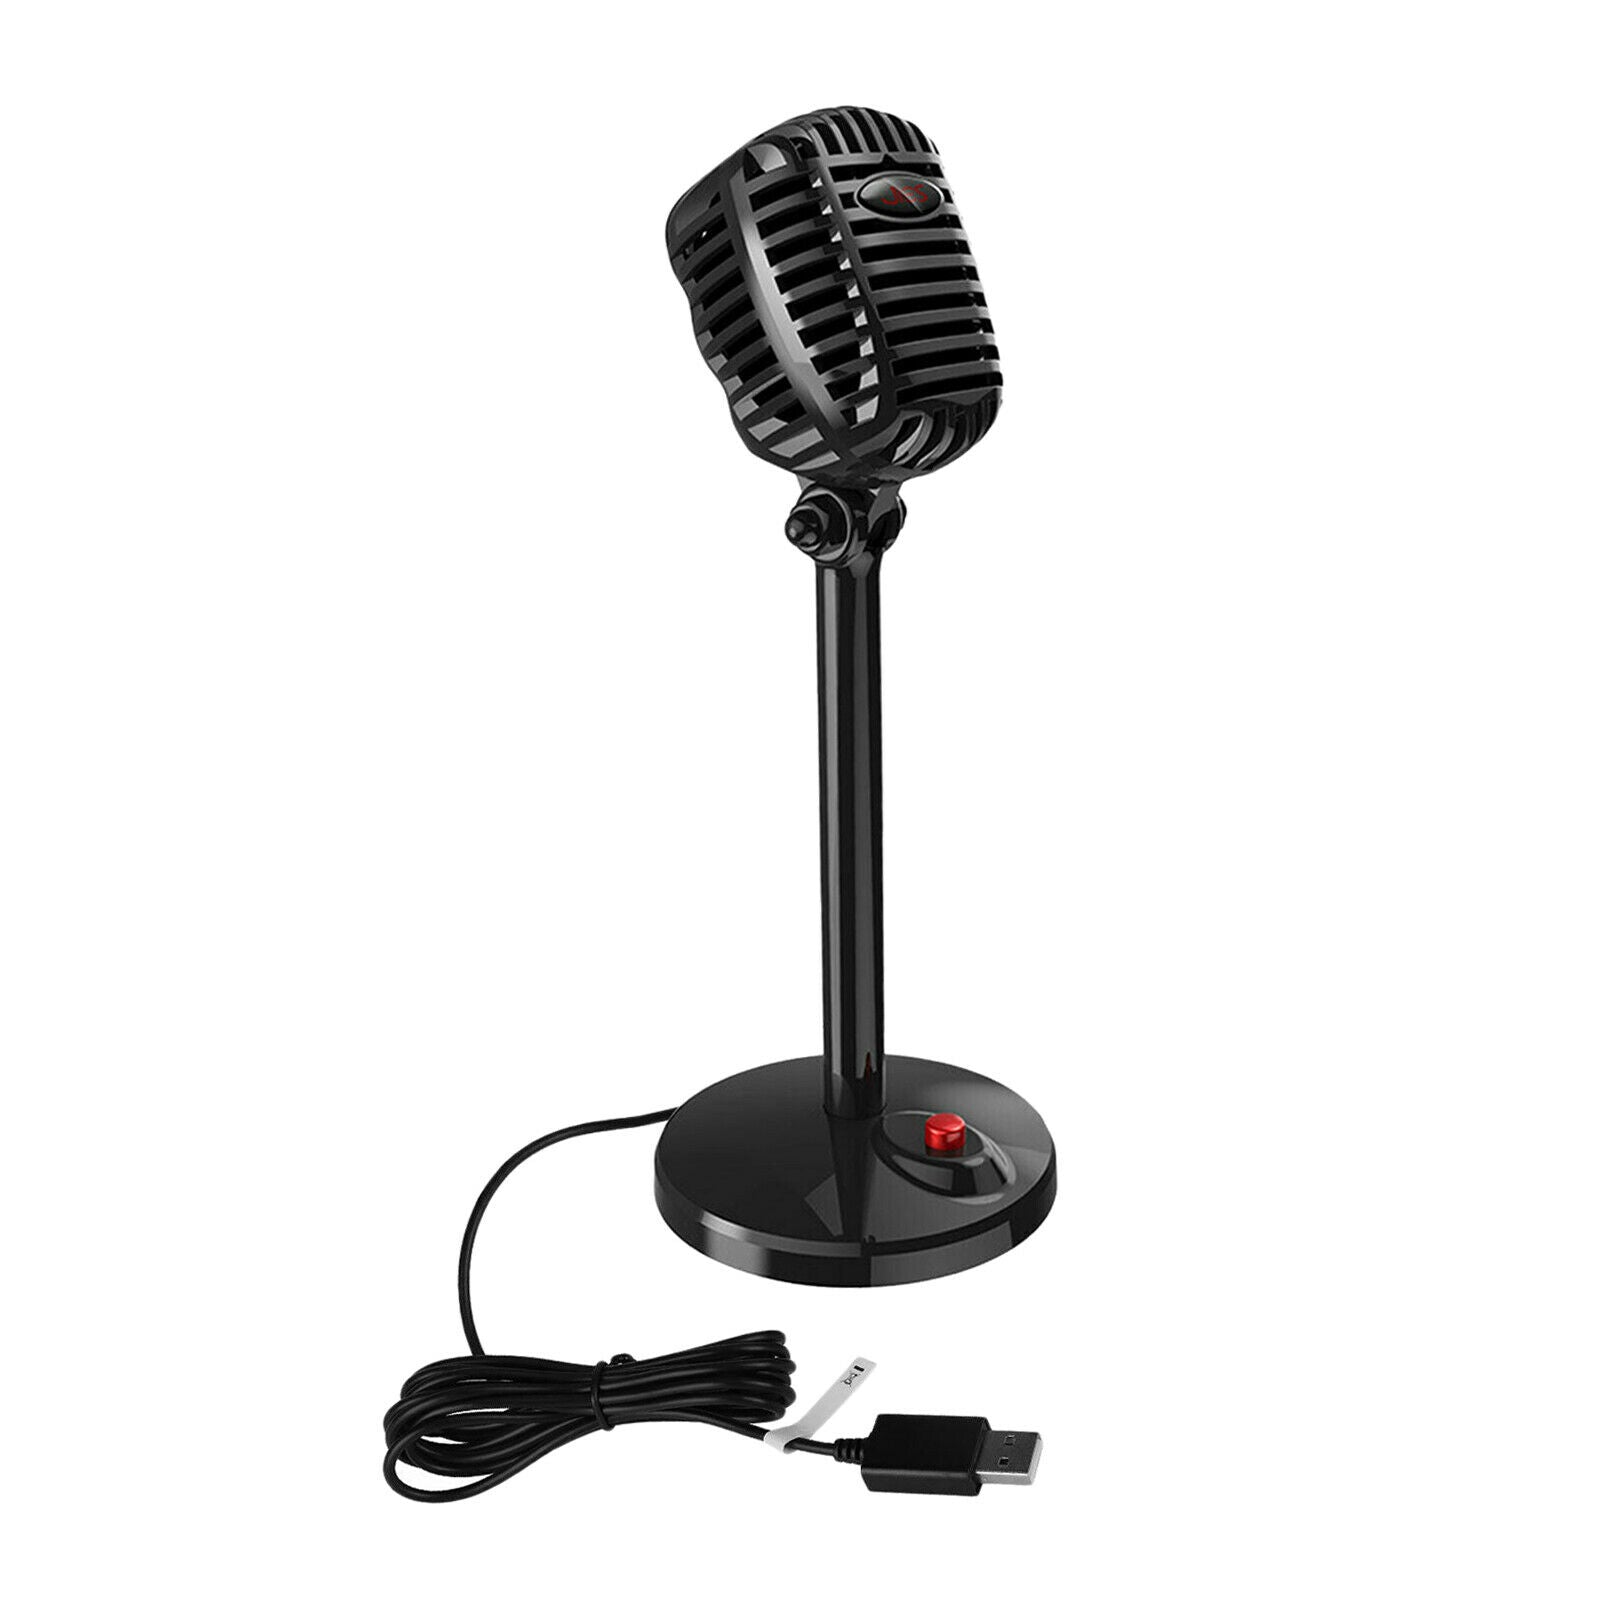 USB Microphone Omnidirectional Condenser Podcast PC Mic USB Plug and Play for